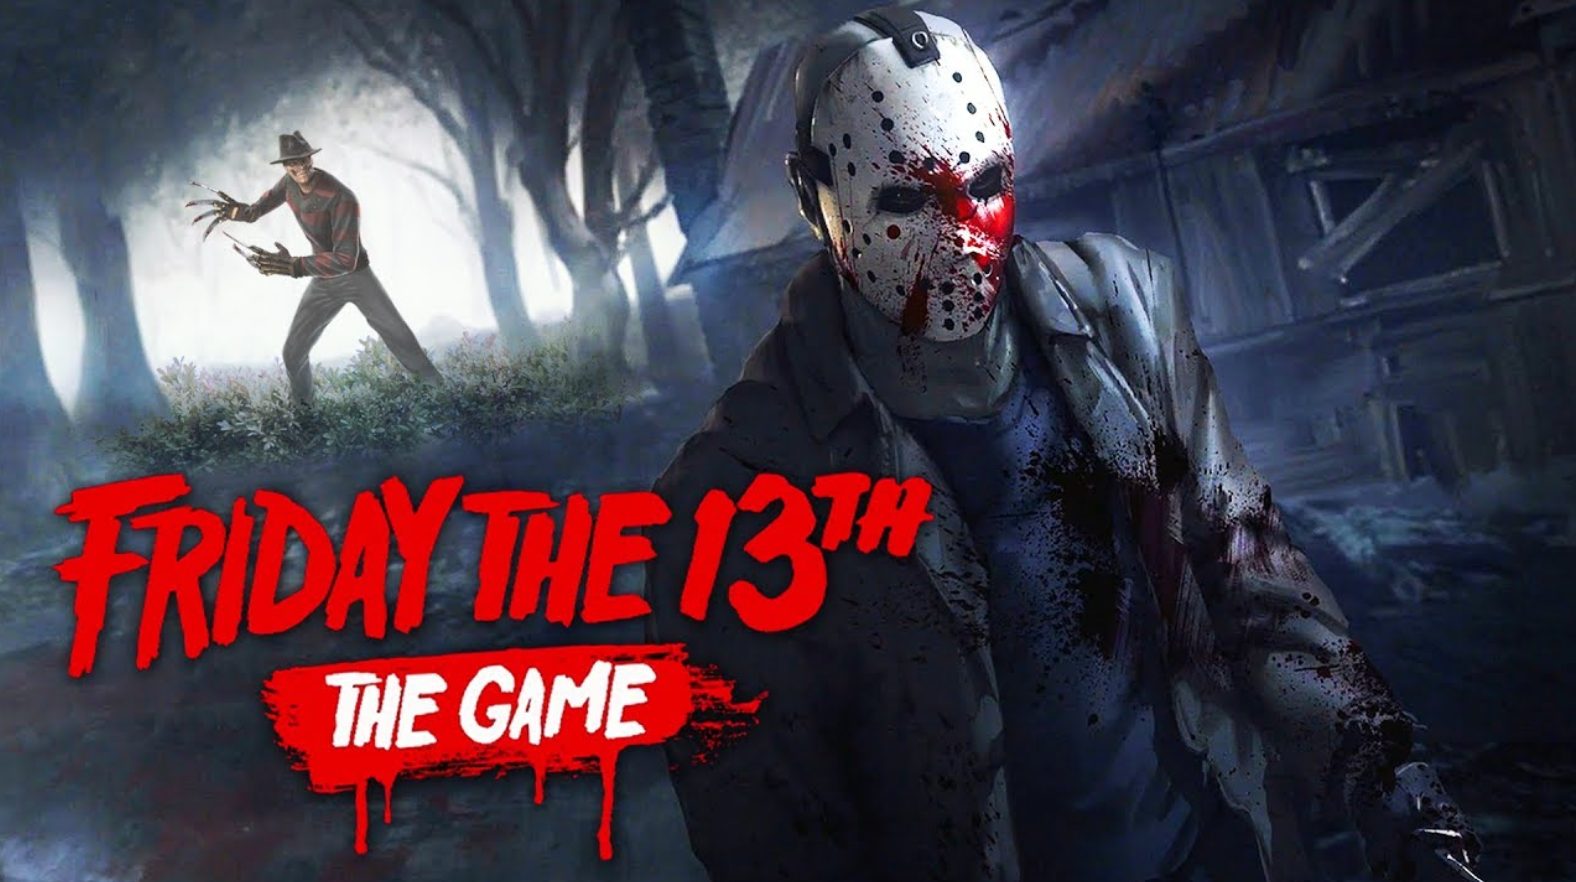 Friday the 13th The Game Xbox 360 Version Full Game Setup Free Download